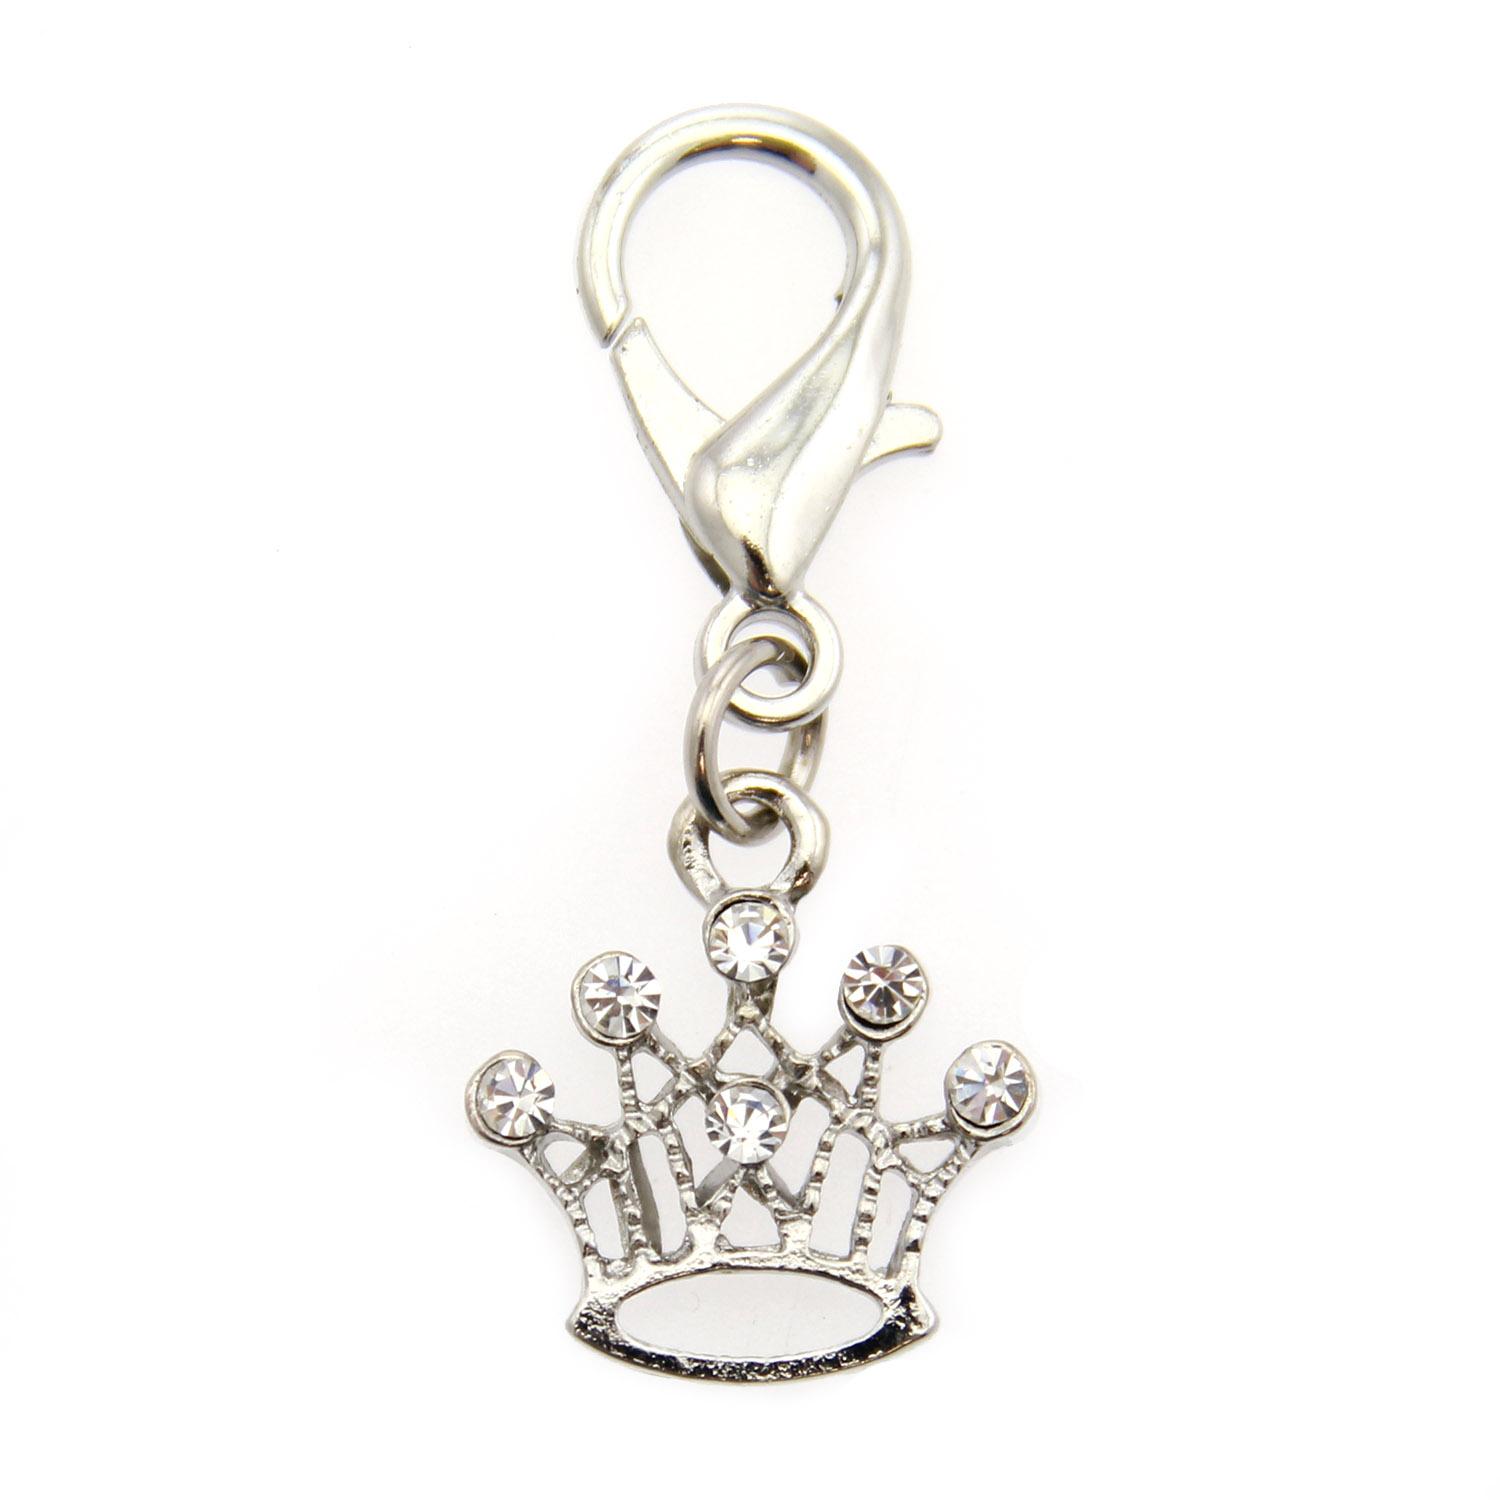 Crown D-Ring Pet Collar Charm by FouFou Dog - Clear